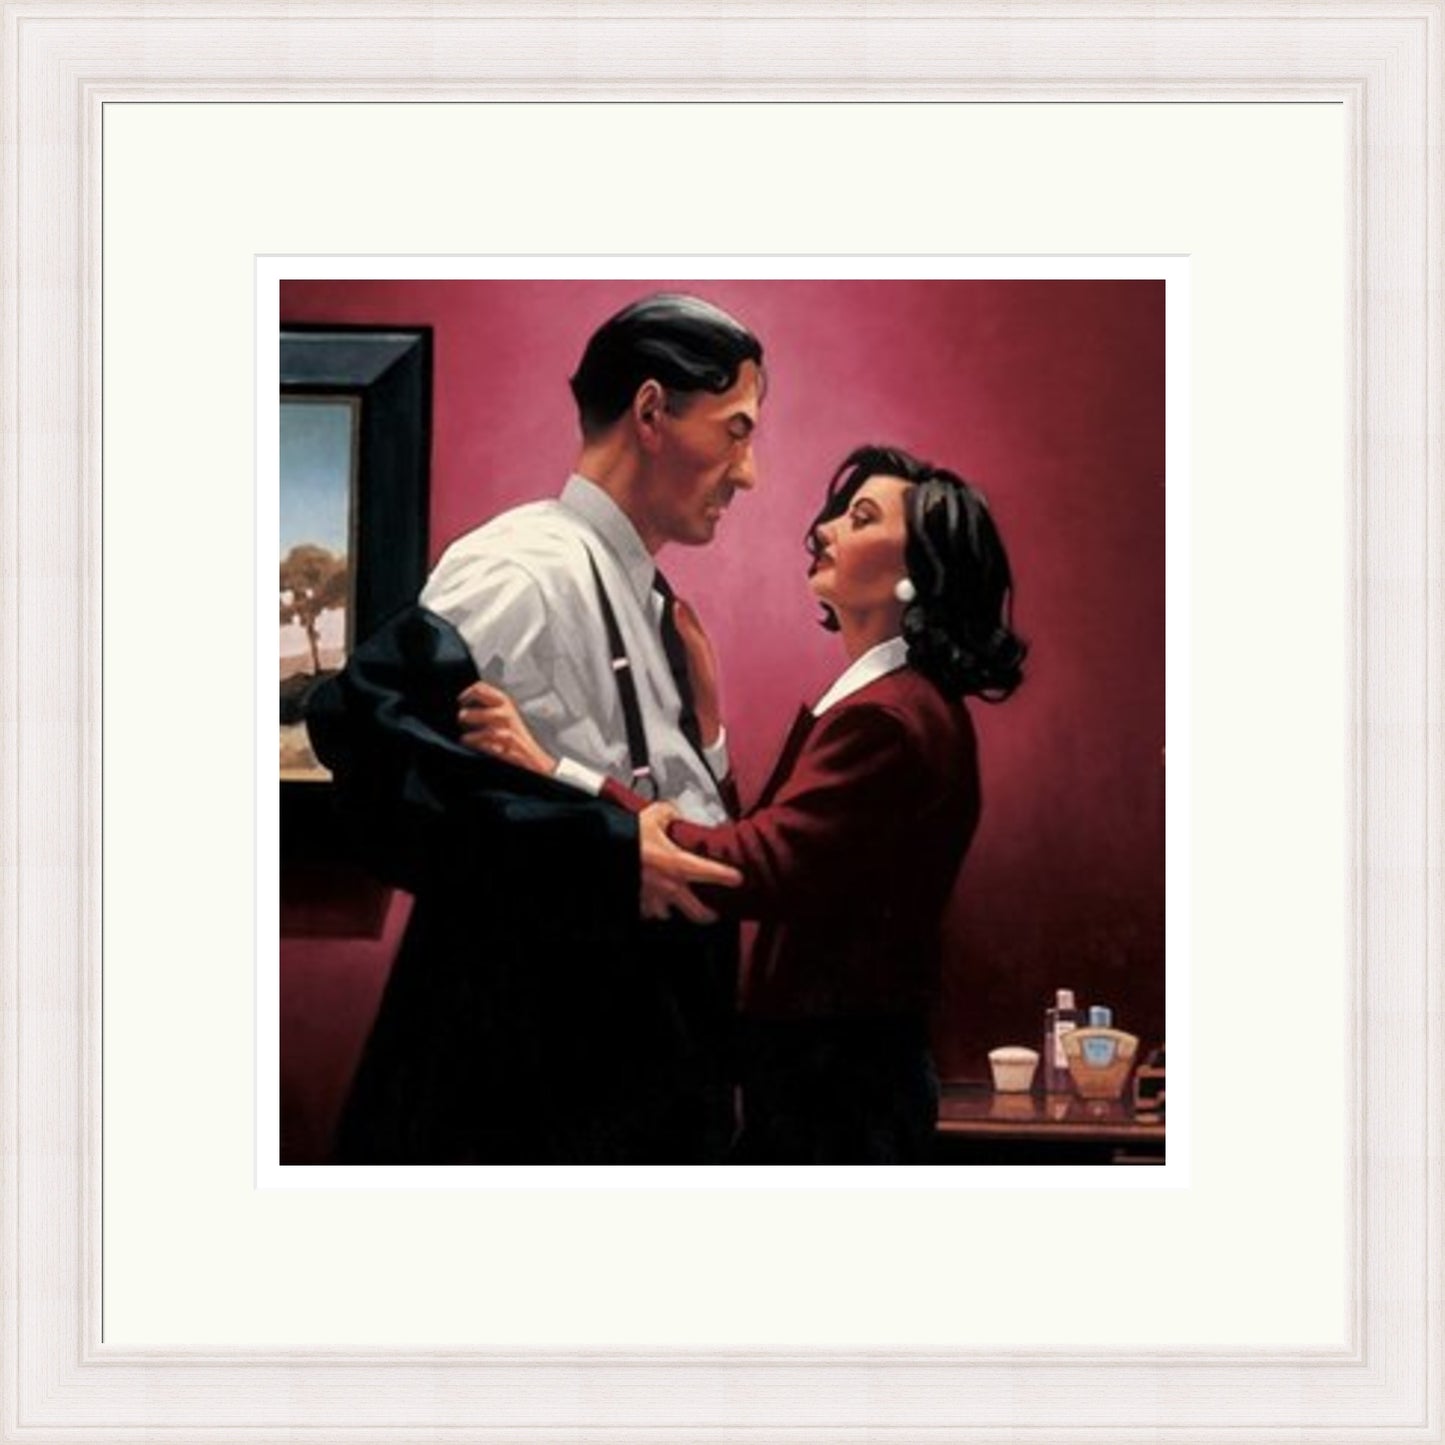 Welcome to my World by Jack Vettriano